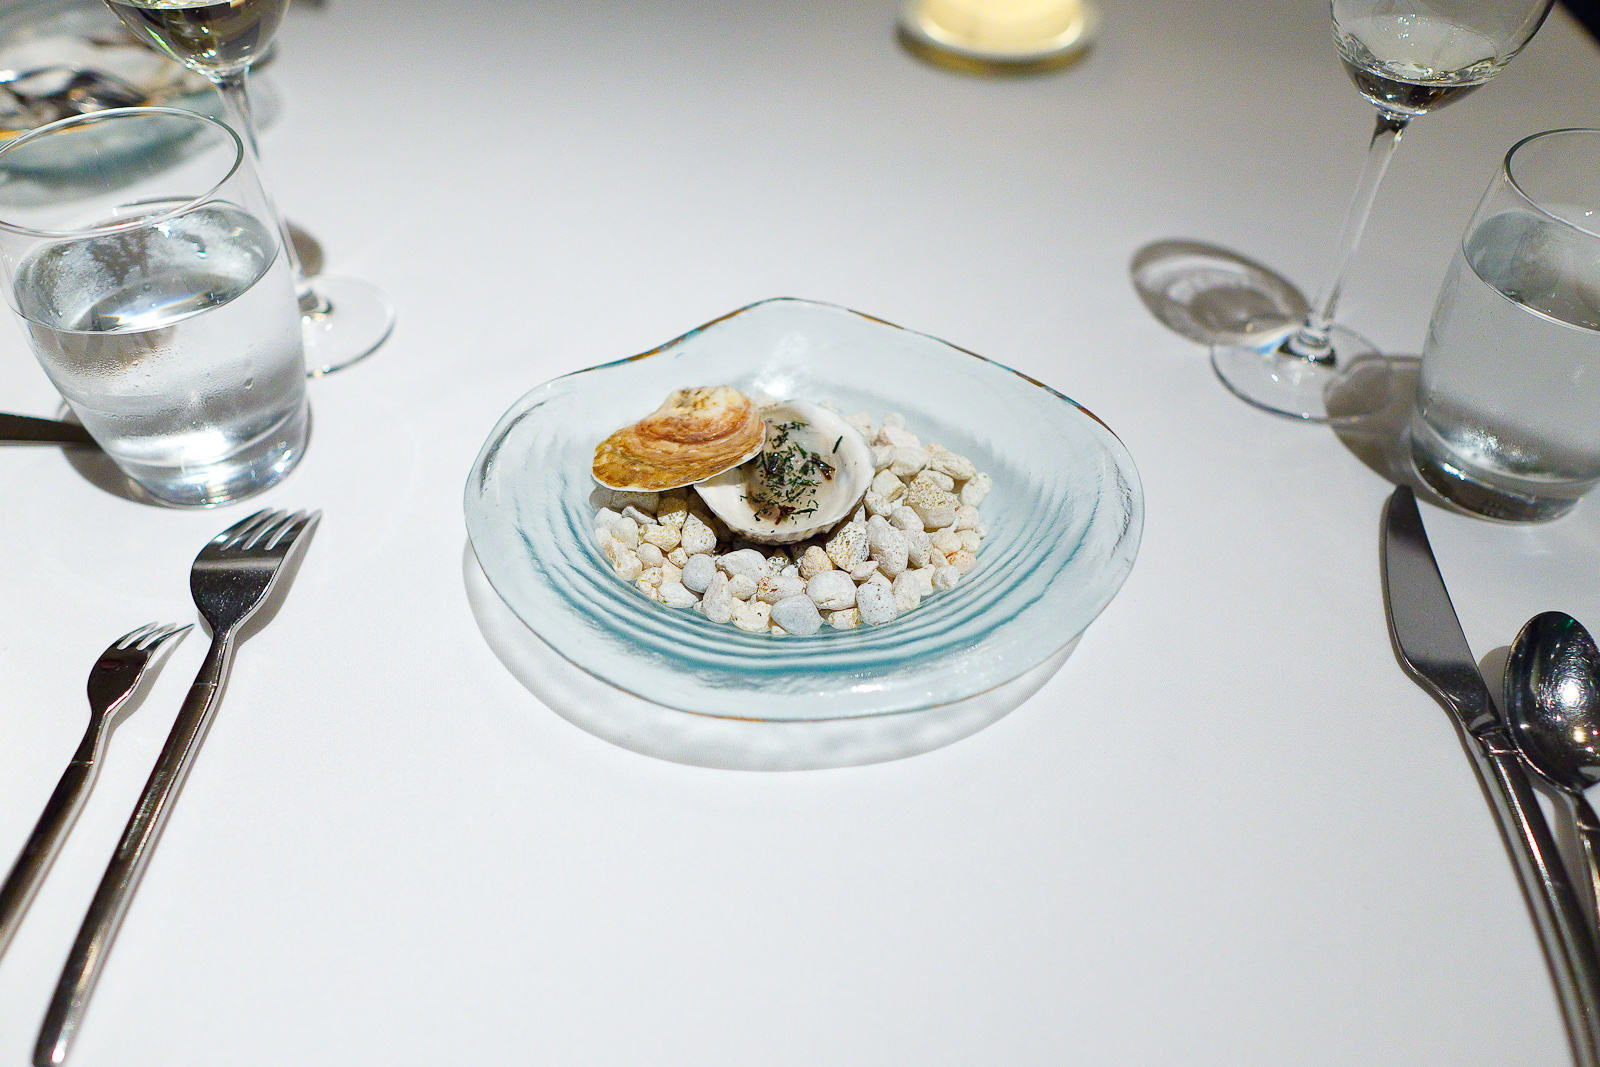 3rd Course: "An elemental oyster" - Lightly poached in its own shell, ocean water gelée, nori flakes